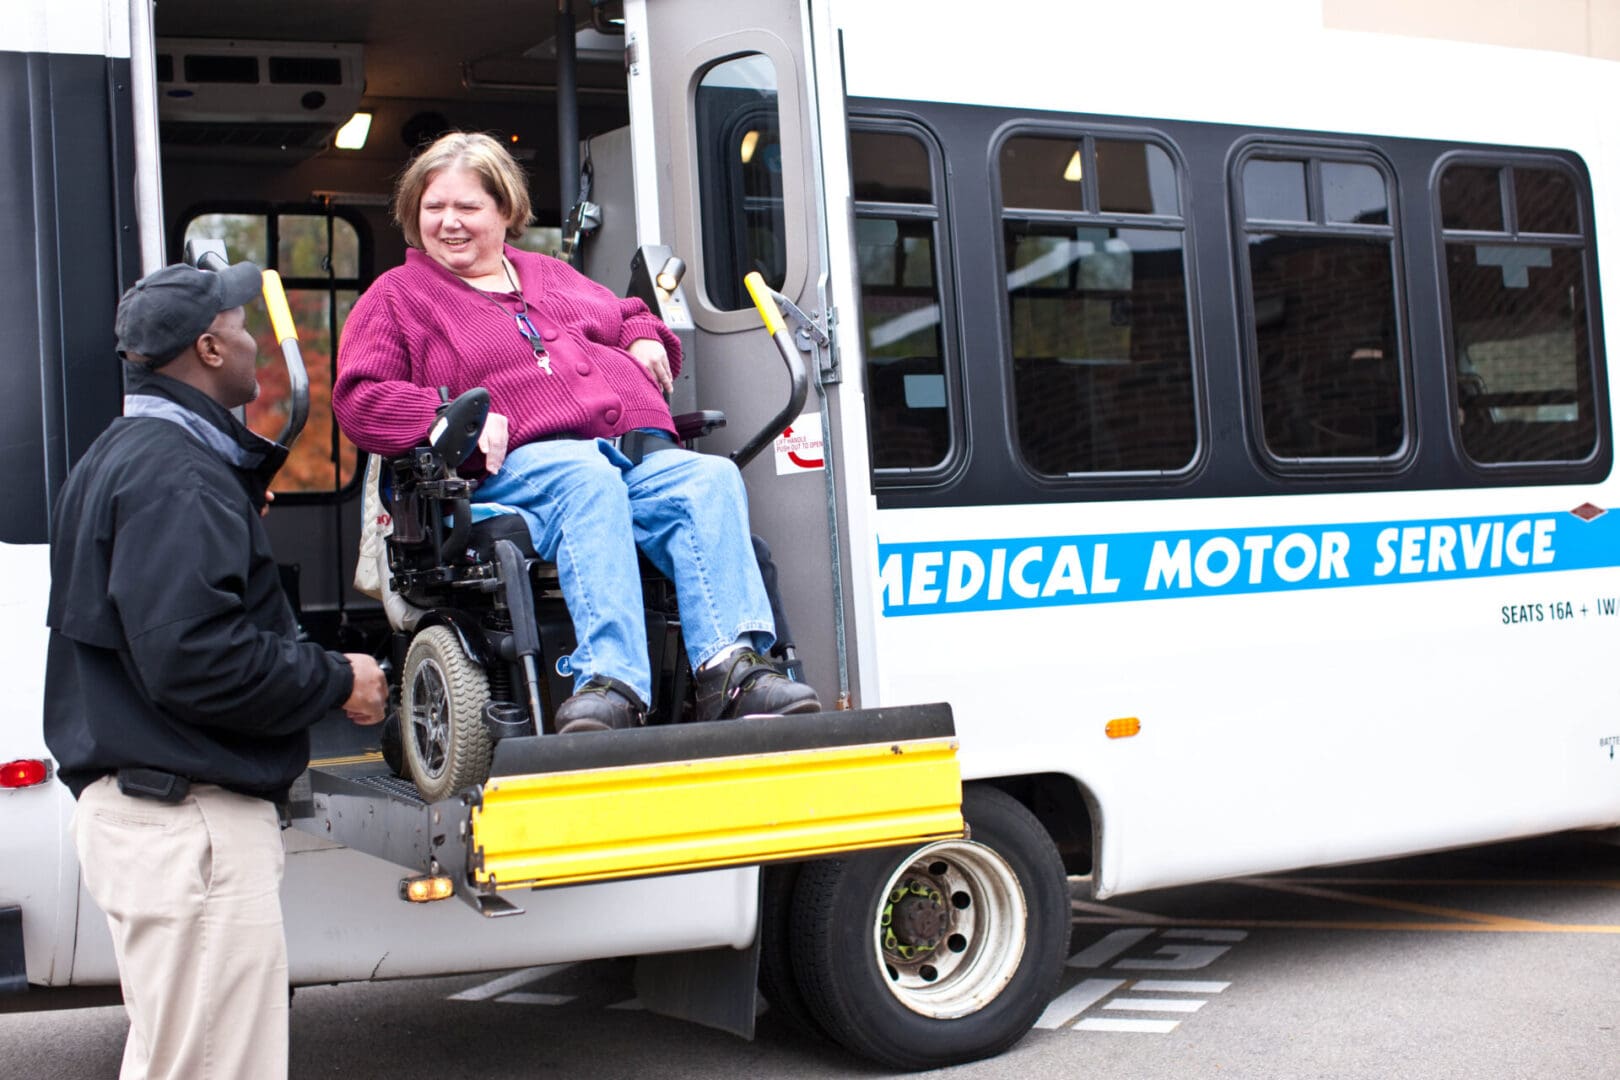 A woman in a wheelchair is sitting on the back of a bus.